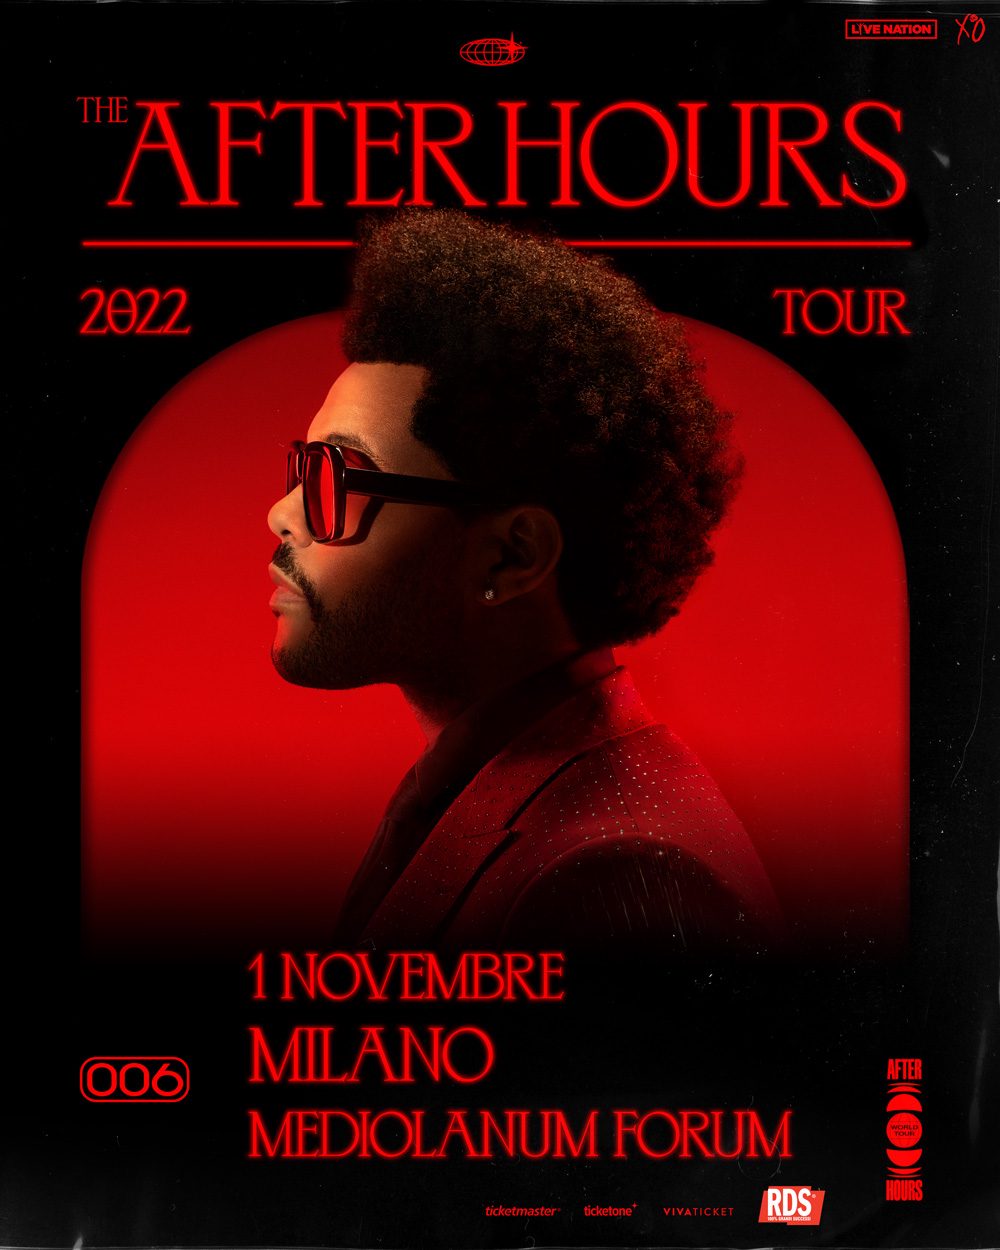 THE WEEKND ANNUNCIA IL SUO RITORNO CON AFTER HOURS WORLD TOUR